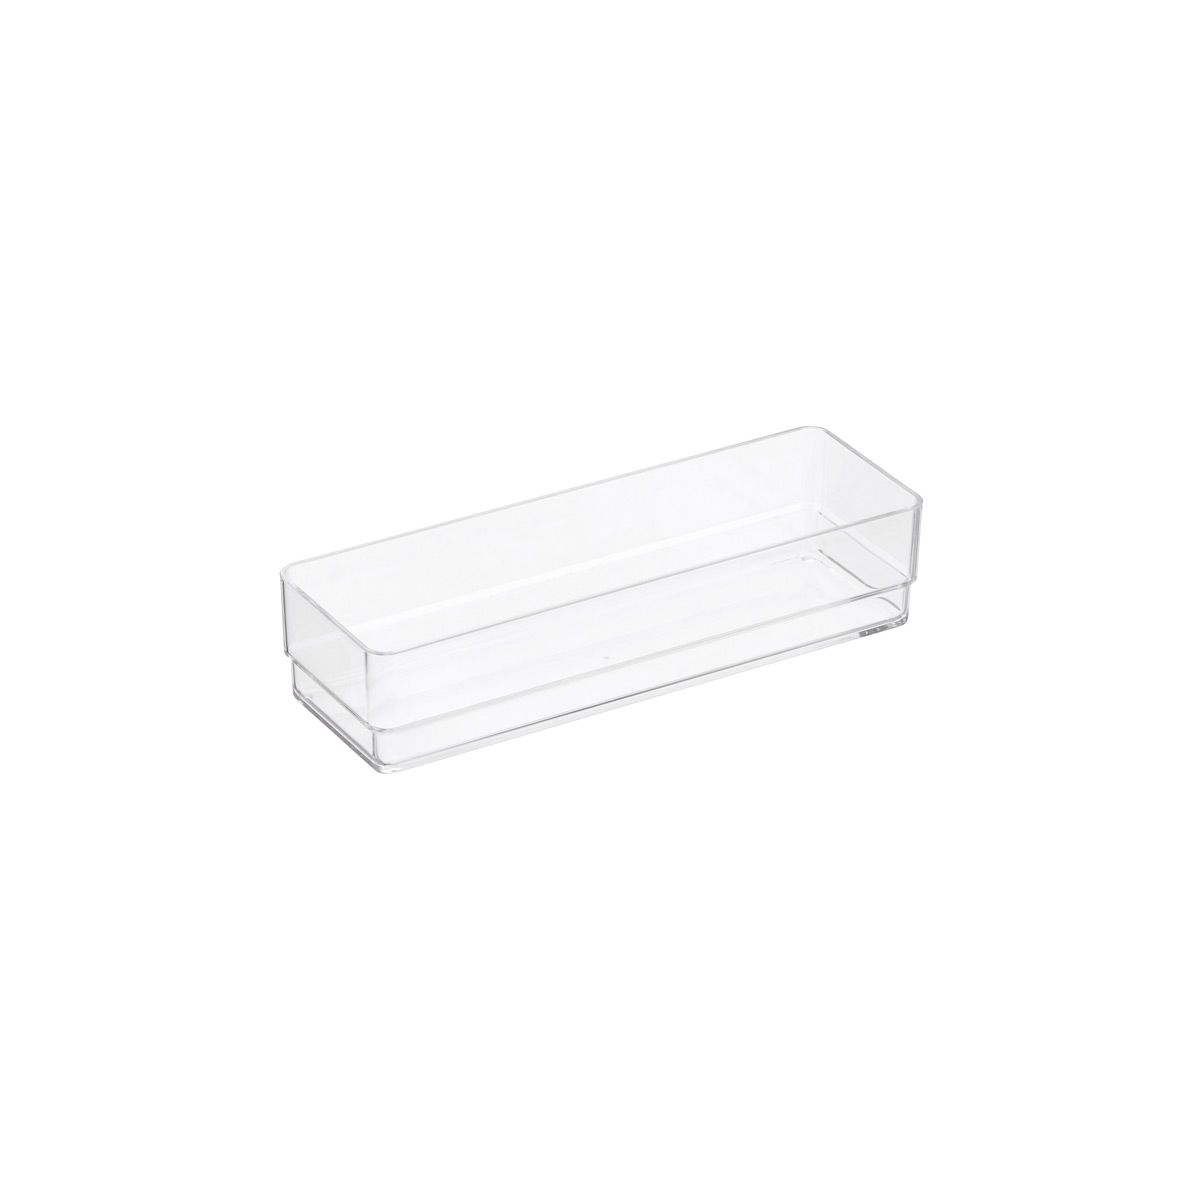 Acrylic Office Drawer Organizers | The Container Store